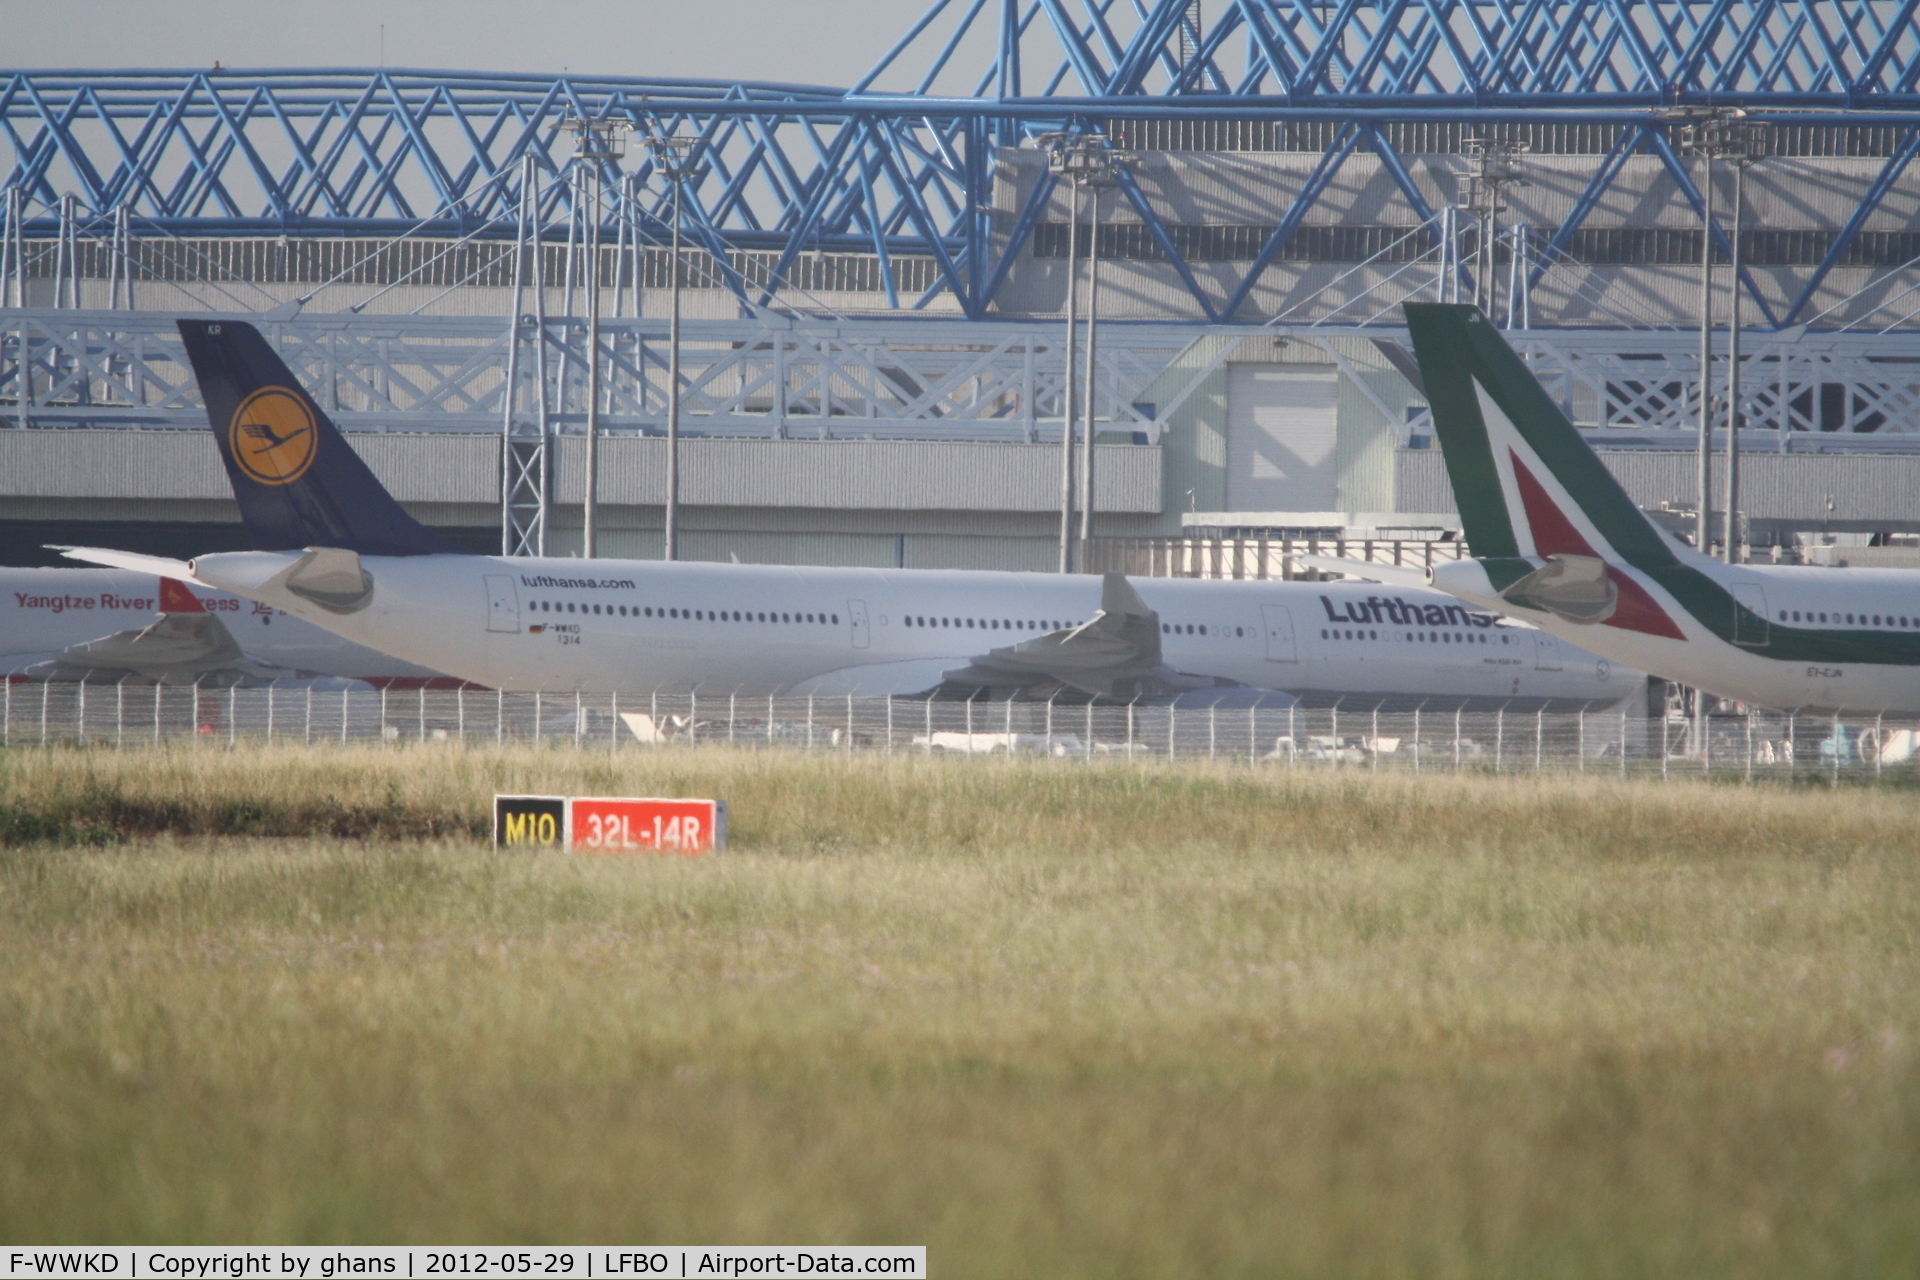 F-WWKD, 2012 Airbus A330-343X C/N 1314, to become D-AIKR